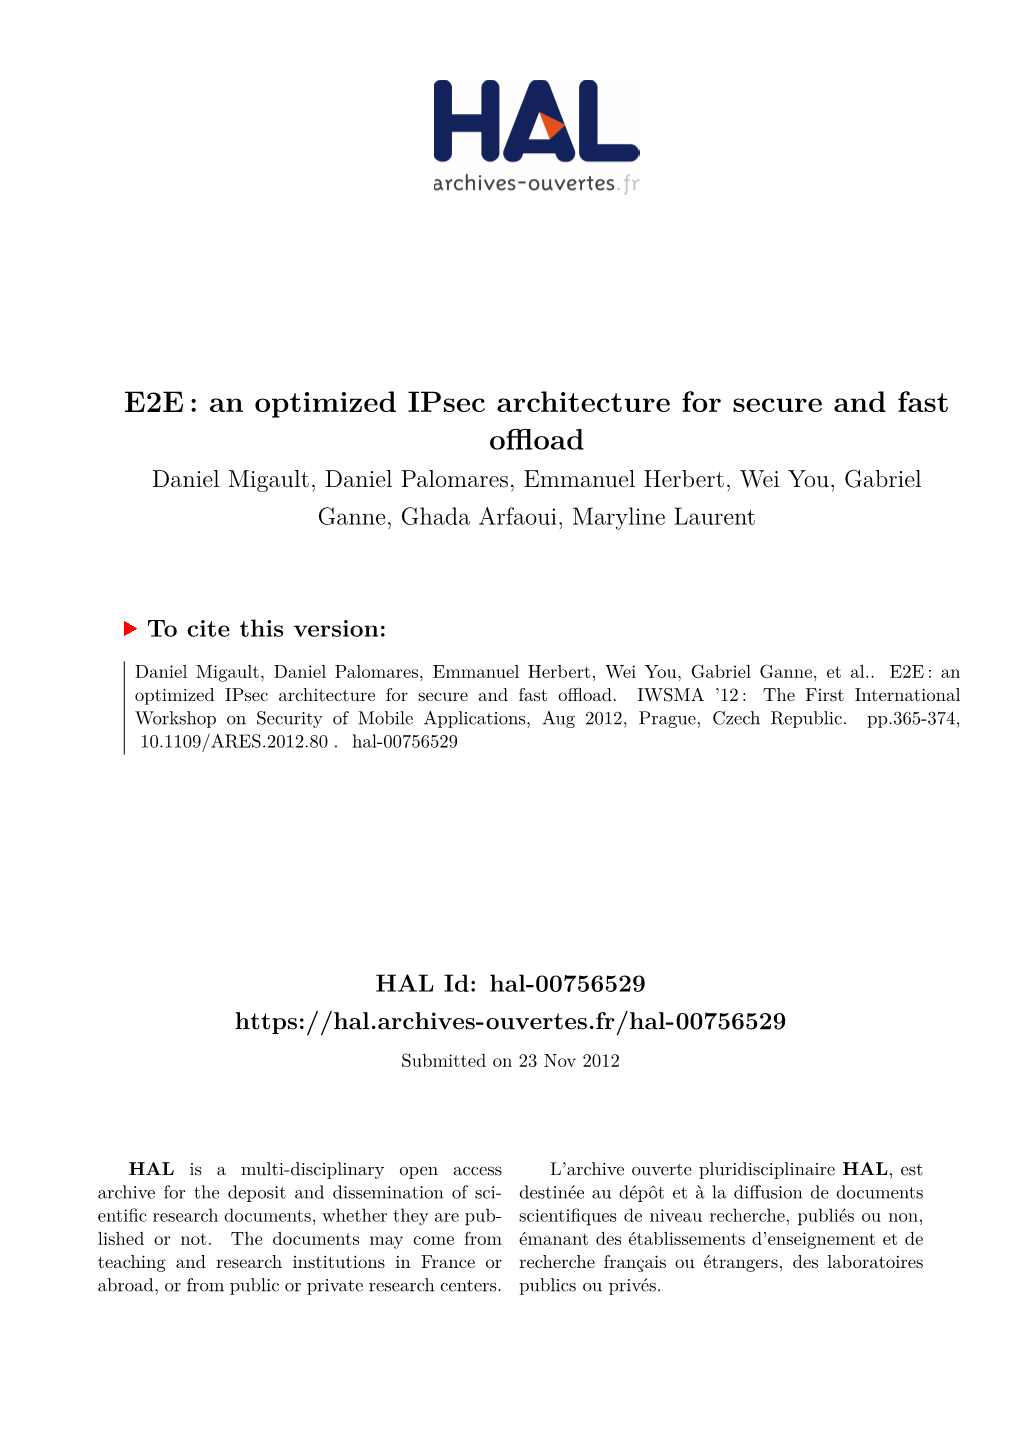 E2E: an Optimized Ipsec Architecture for Secure and Fast Offload